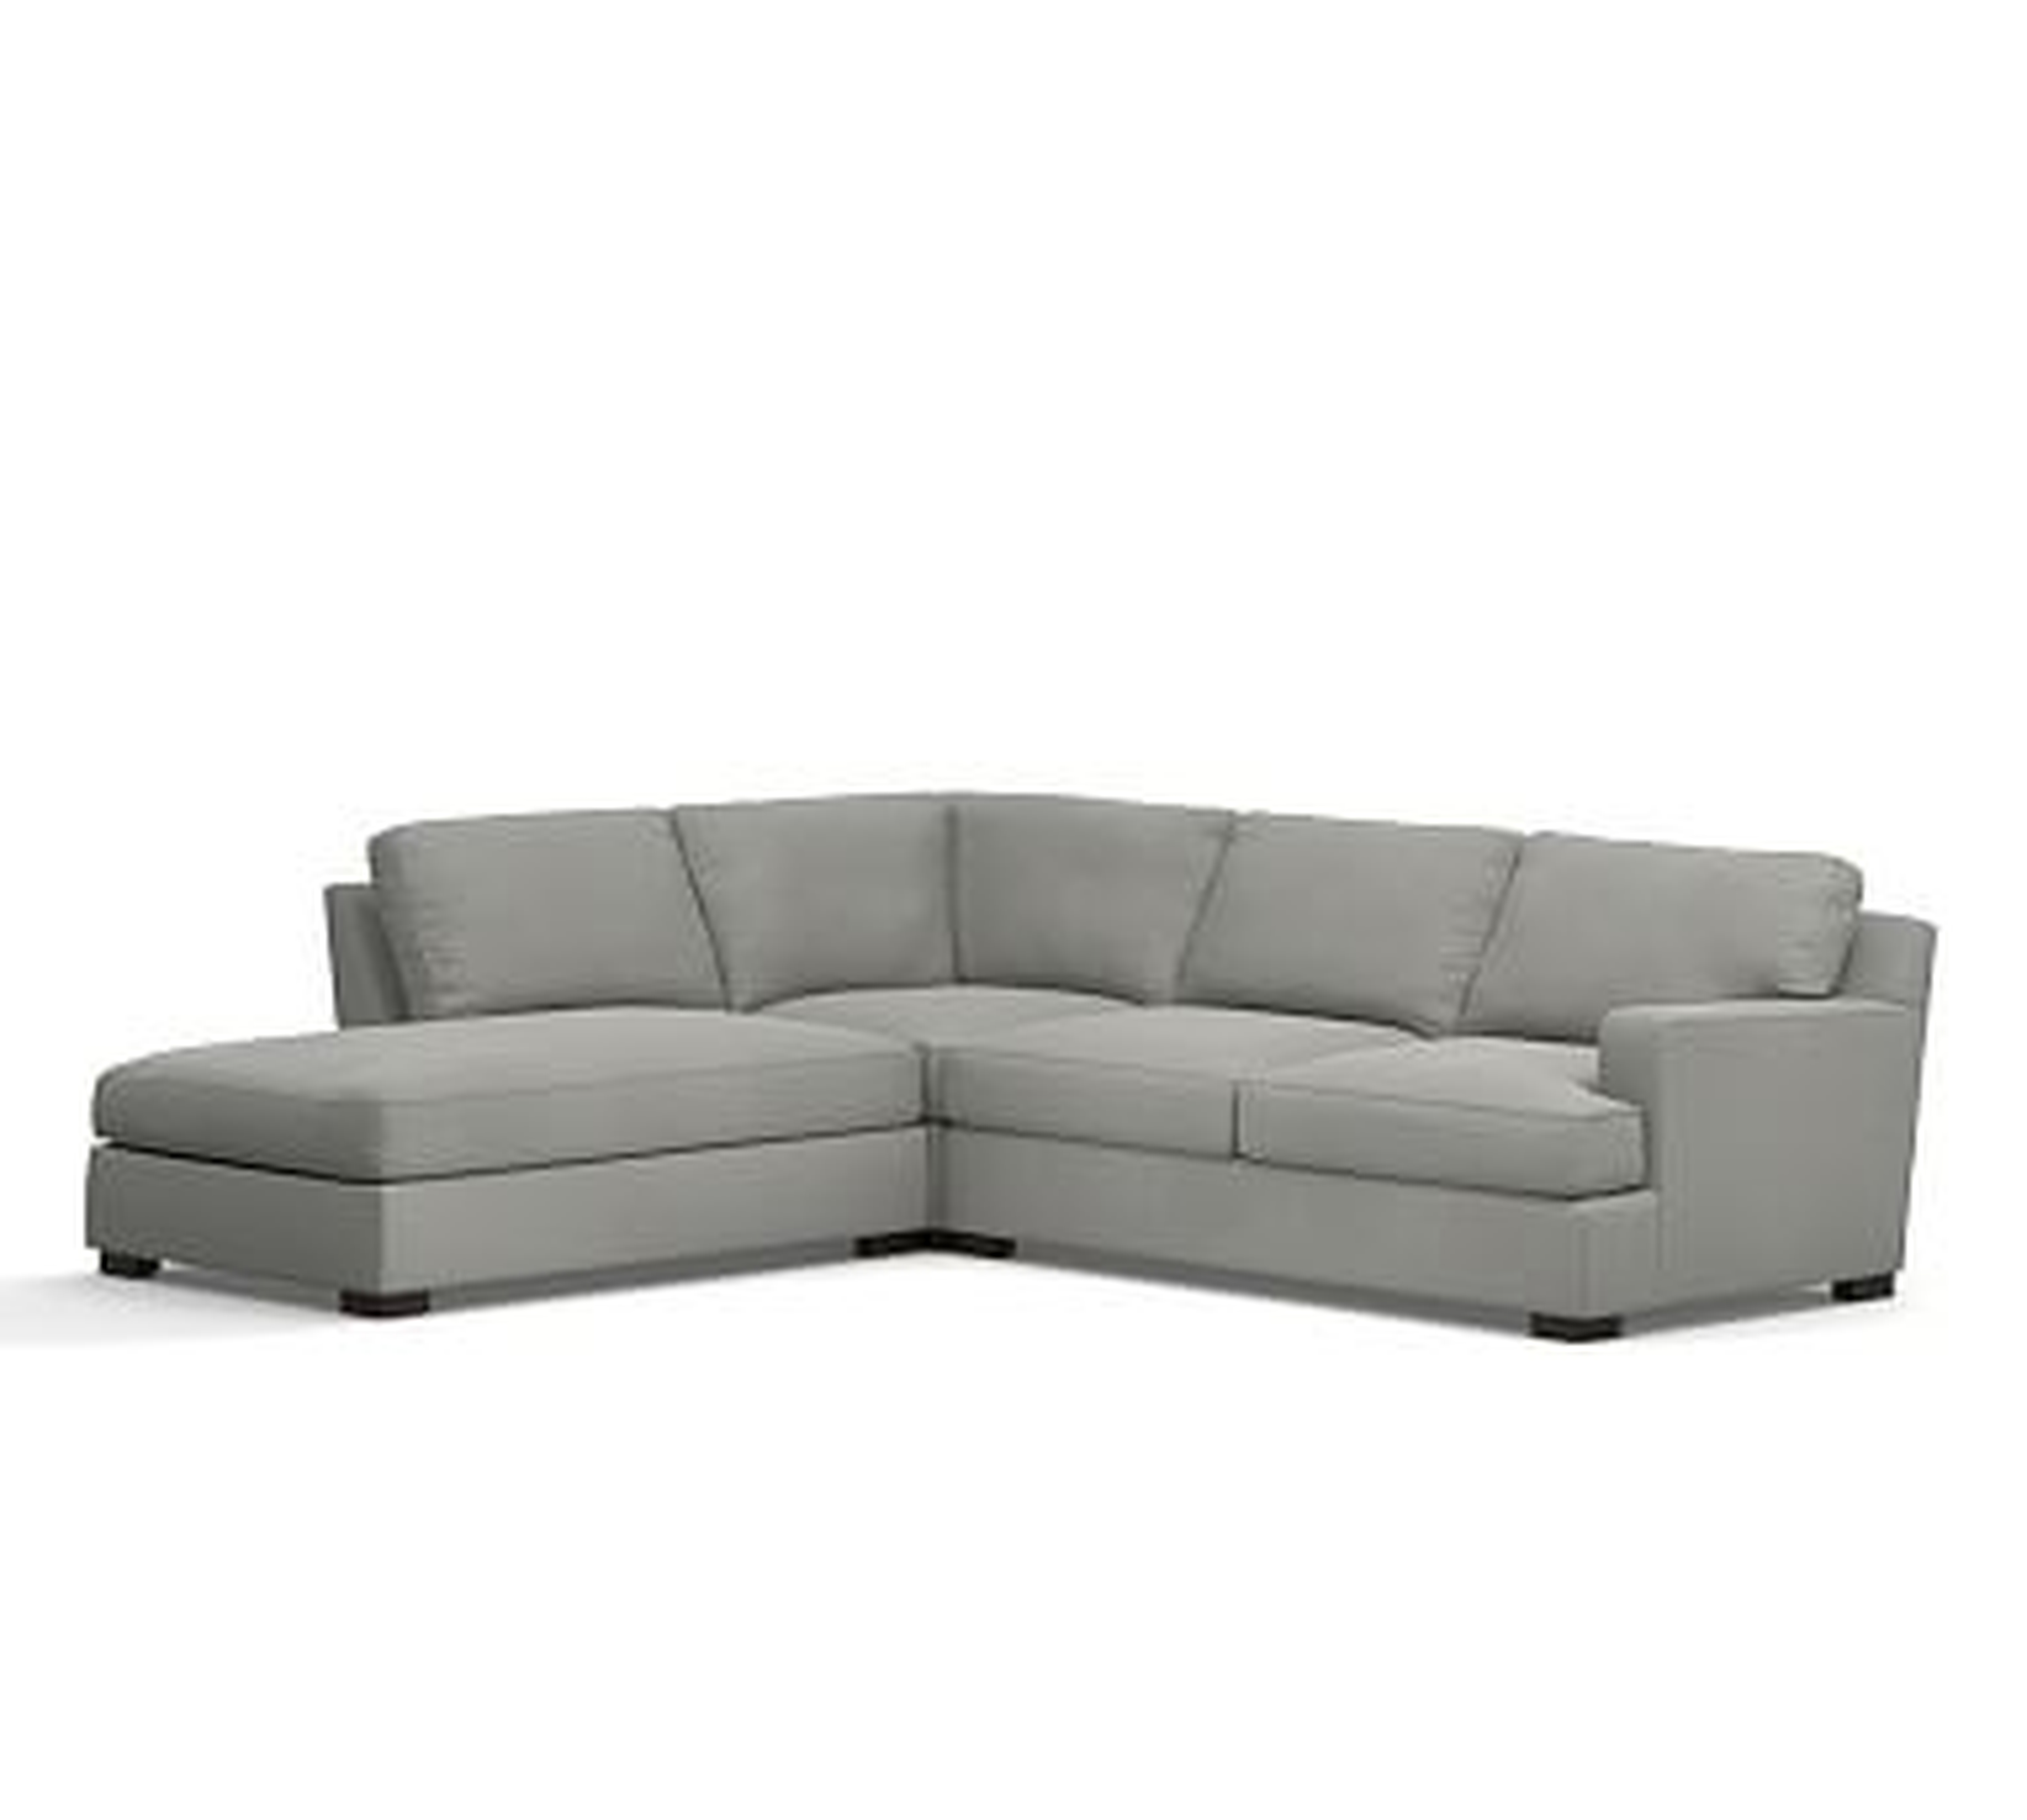 Townsend Square Arm Upholstered Right 3-Piece Bumper Sectional, Polyester Wrapped Cushions, Performance Everydaysuede(TM) Metal Gray - Pottery Barn